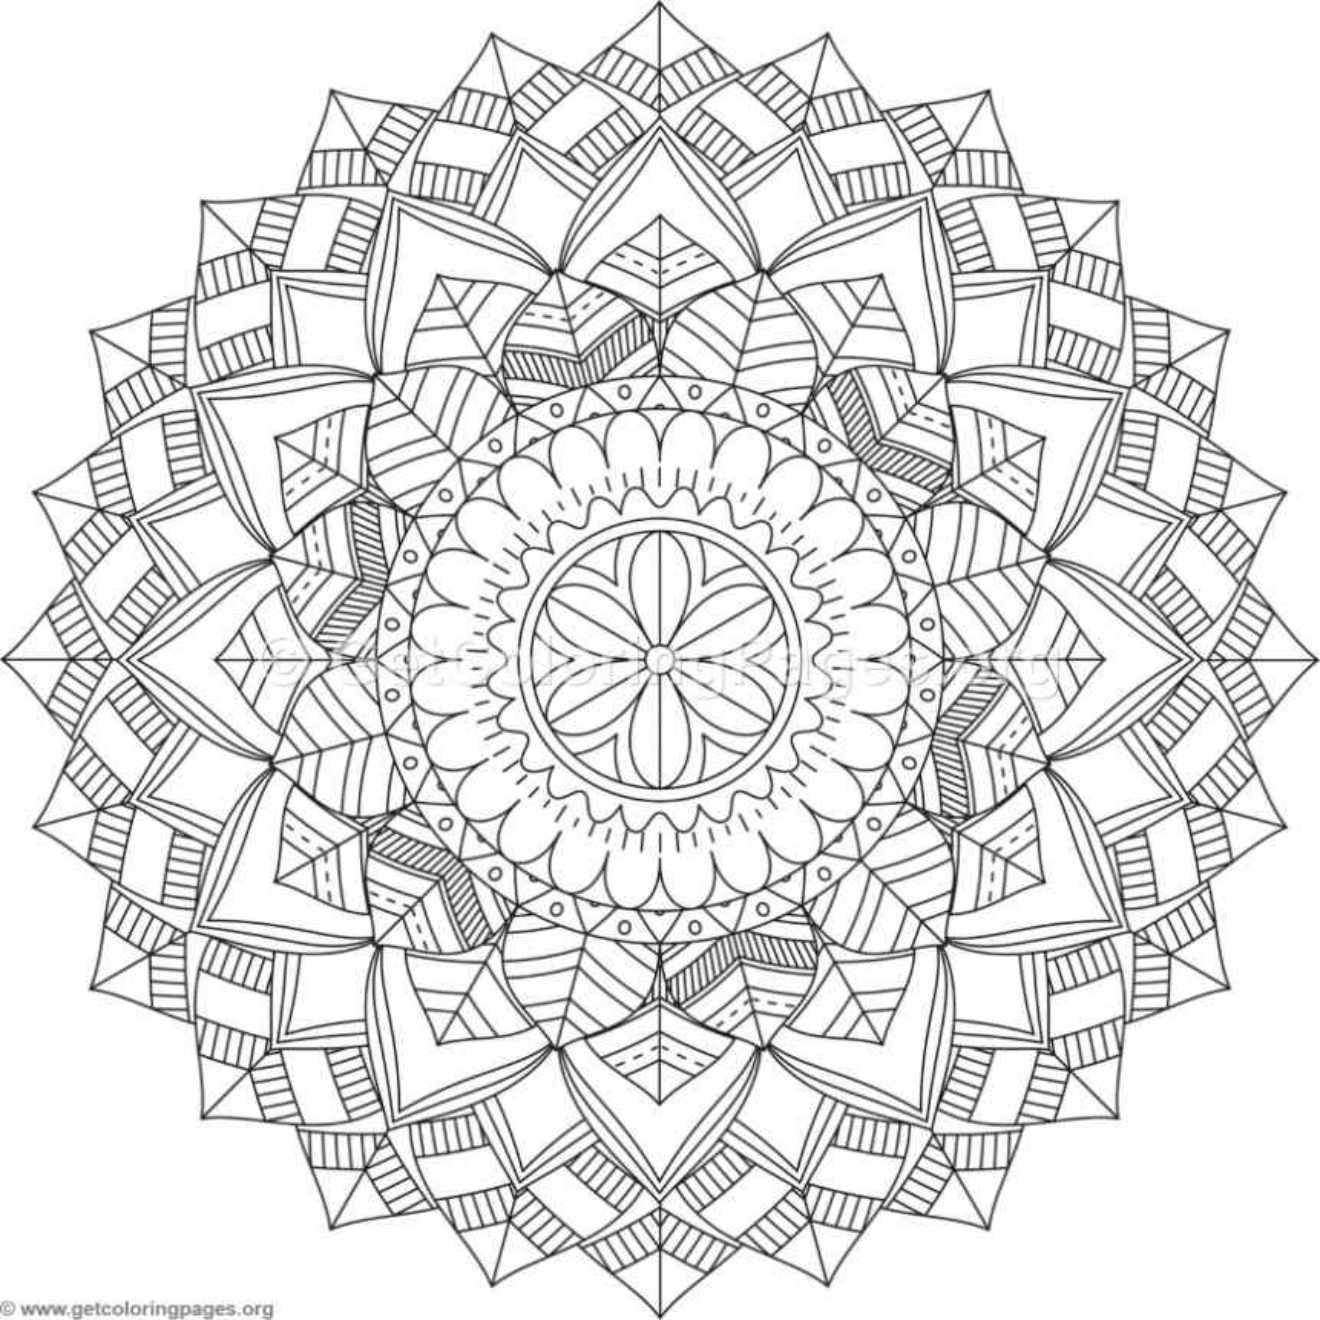 Tribal Art Coloring Pages Adult Coloring Pages